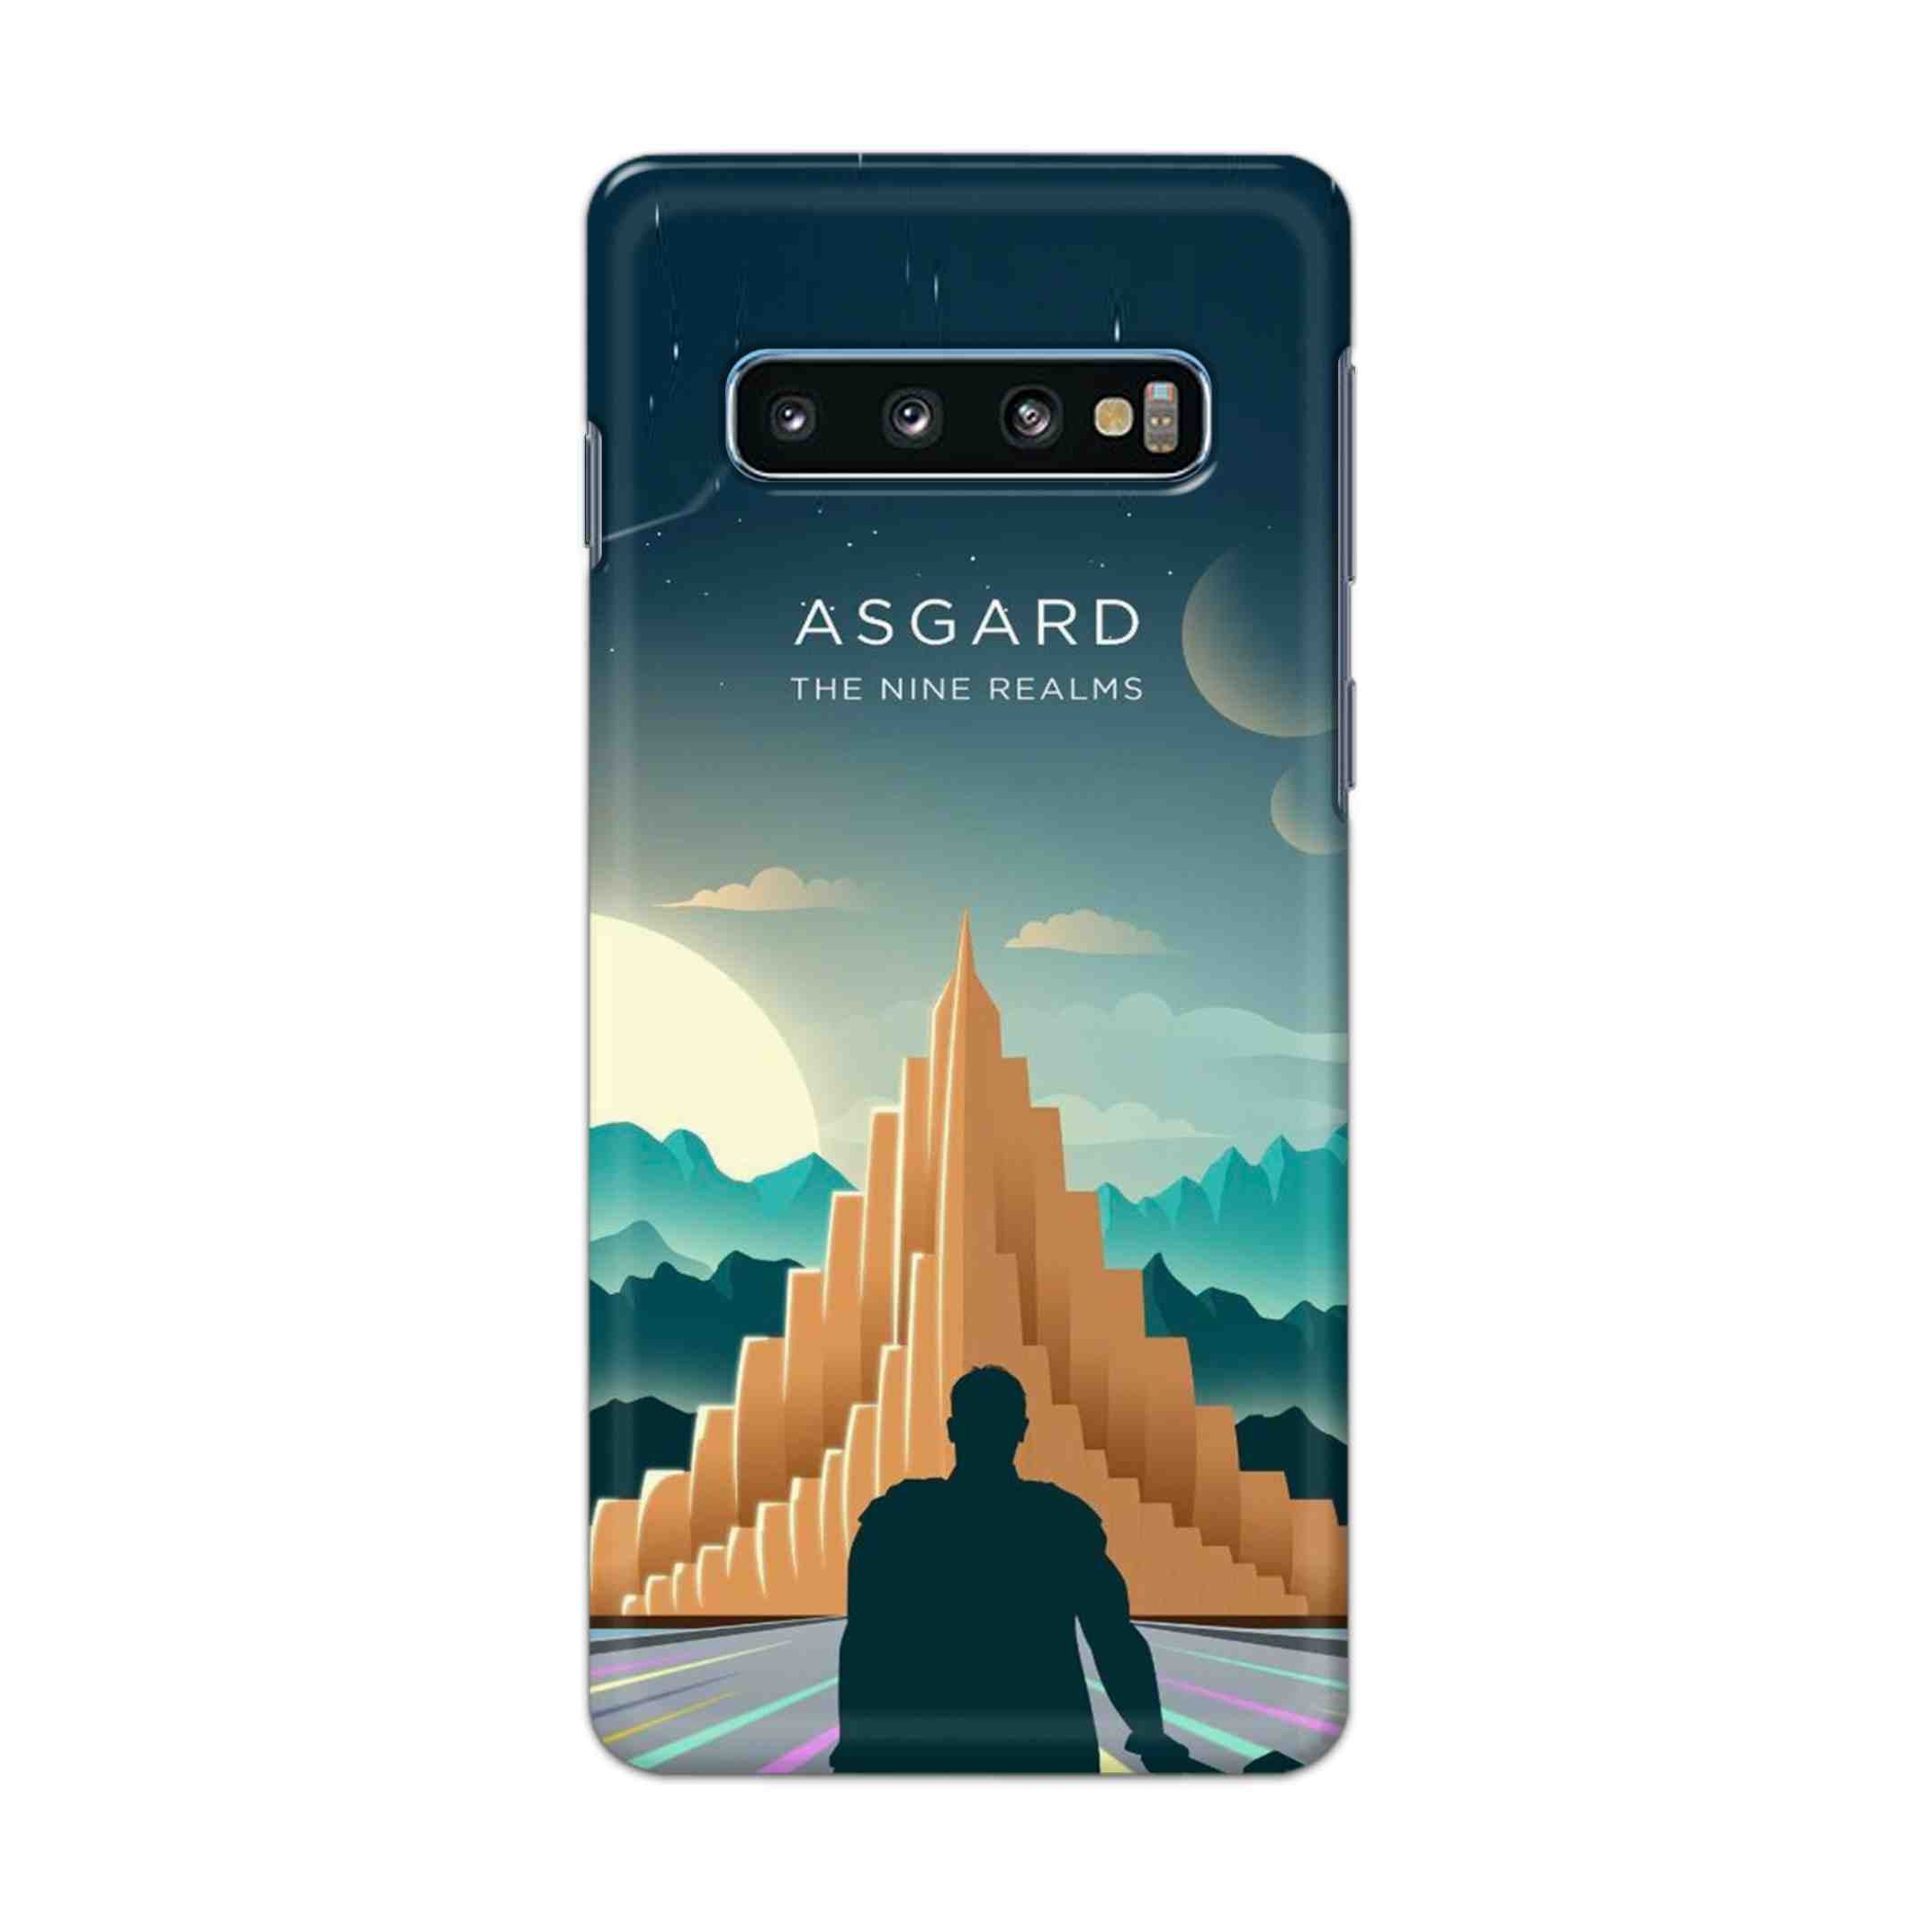 Buy Asgard Hard Back Mobile Phone Case Cover For Samsung Galaxy S10 Plus Online